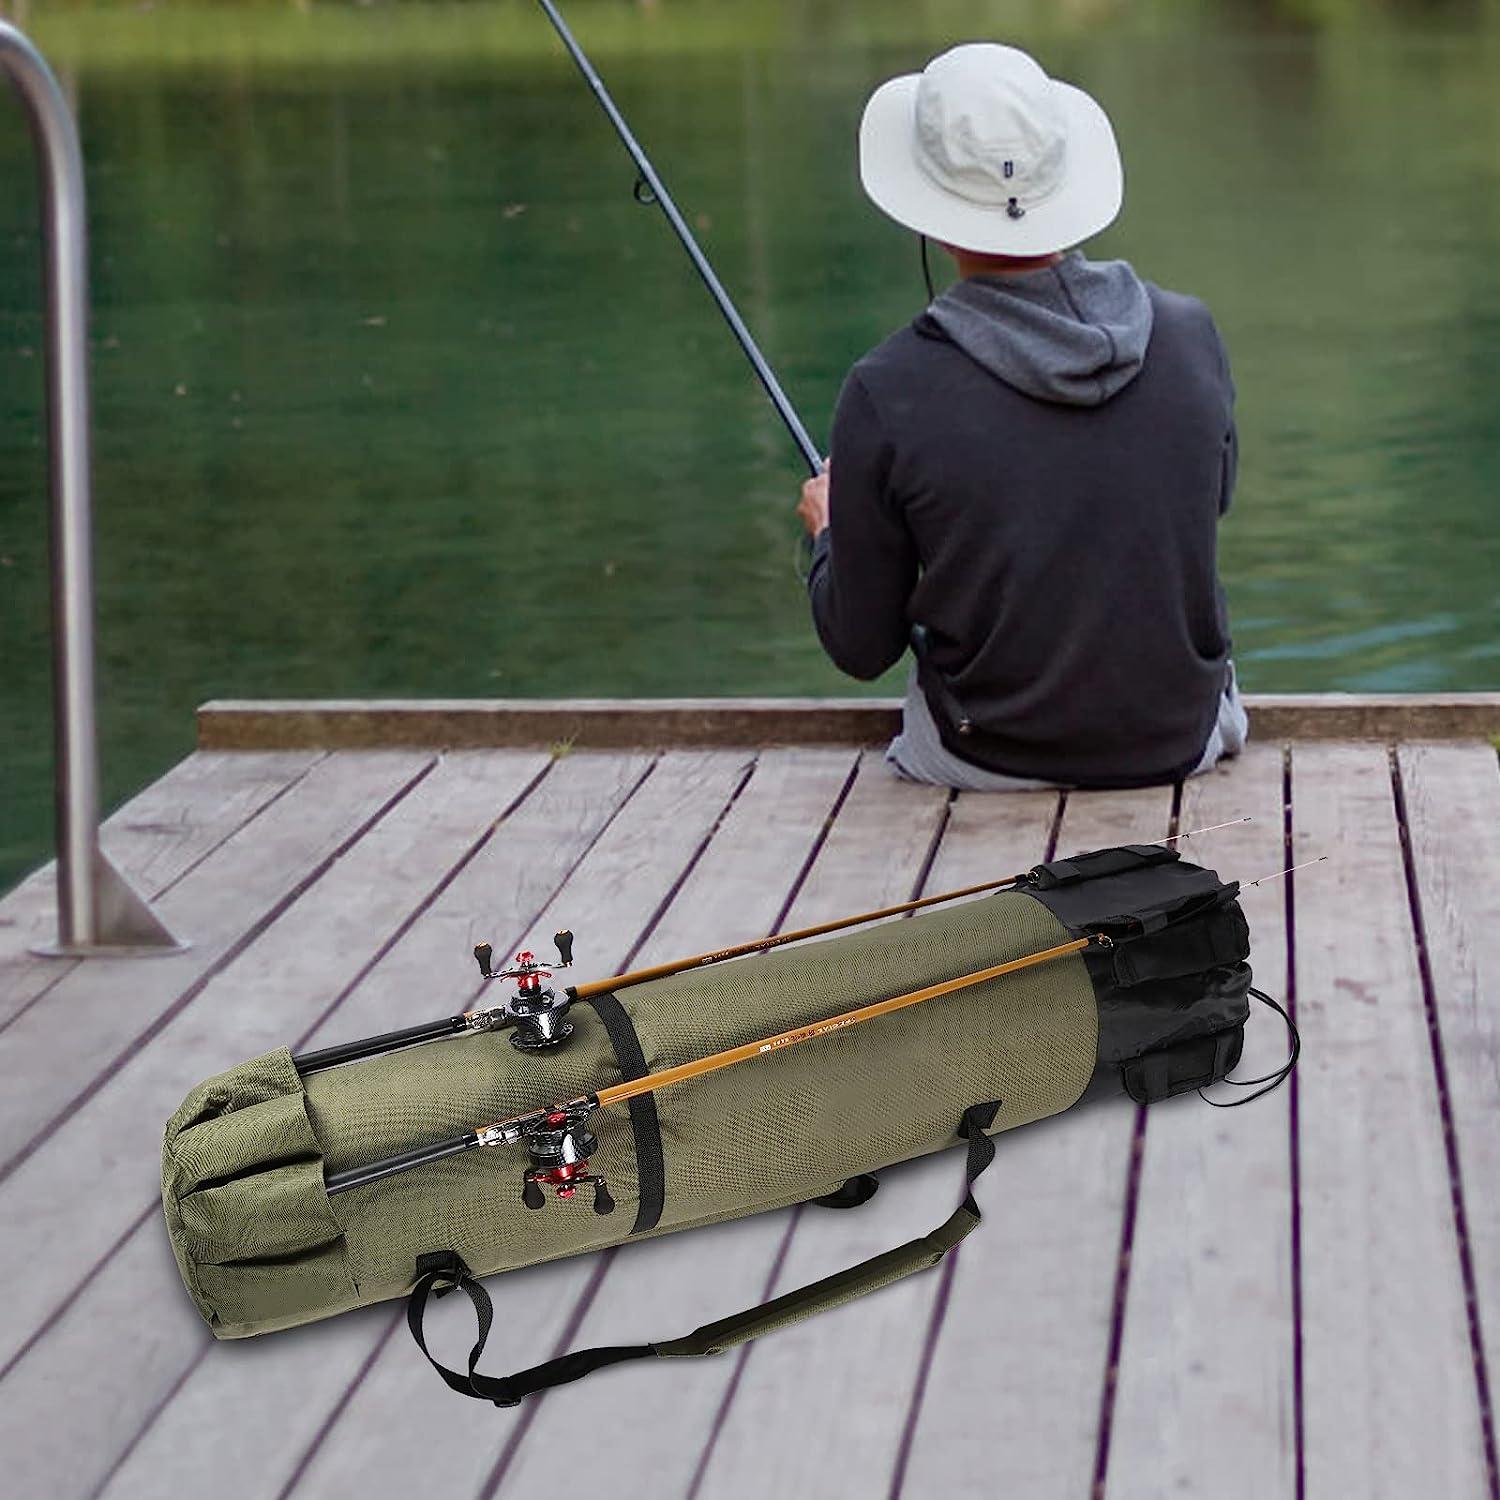 Wowelife Fishing Rod Carrier Fishing Reel Organizer Pole Storage Bag for  Fishing and Traveling,A Gift for Family Father, Daughter and Friends